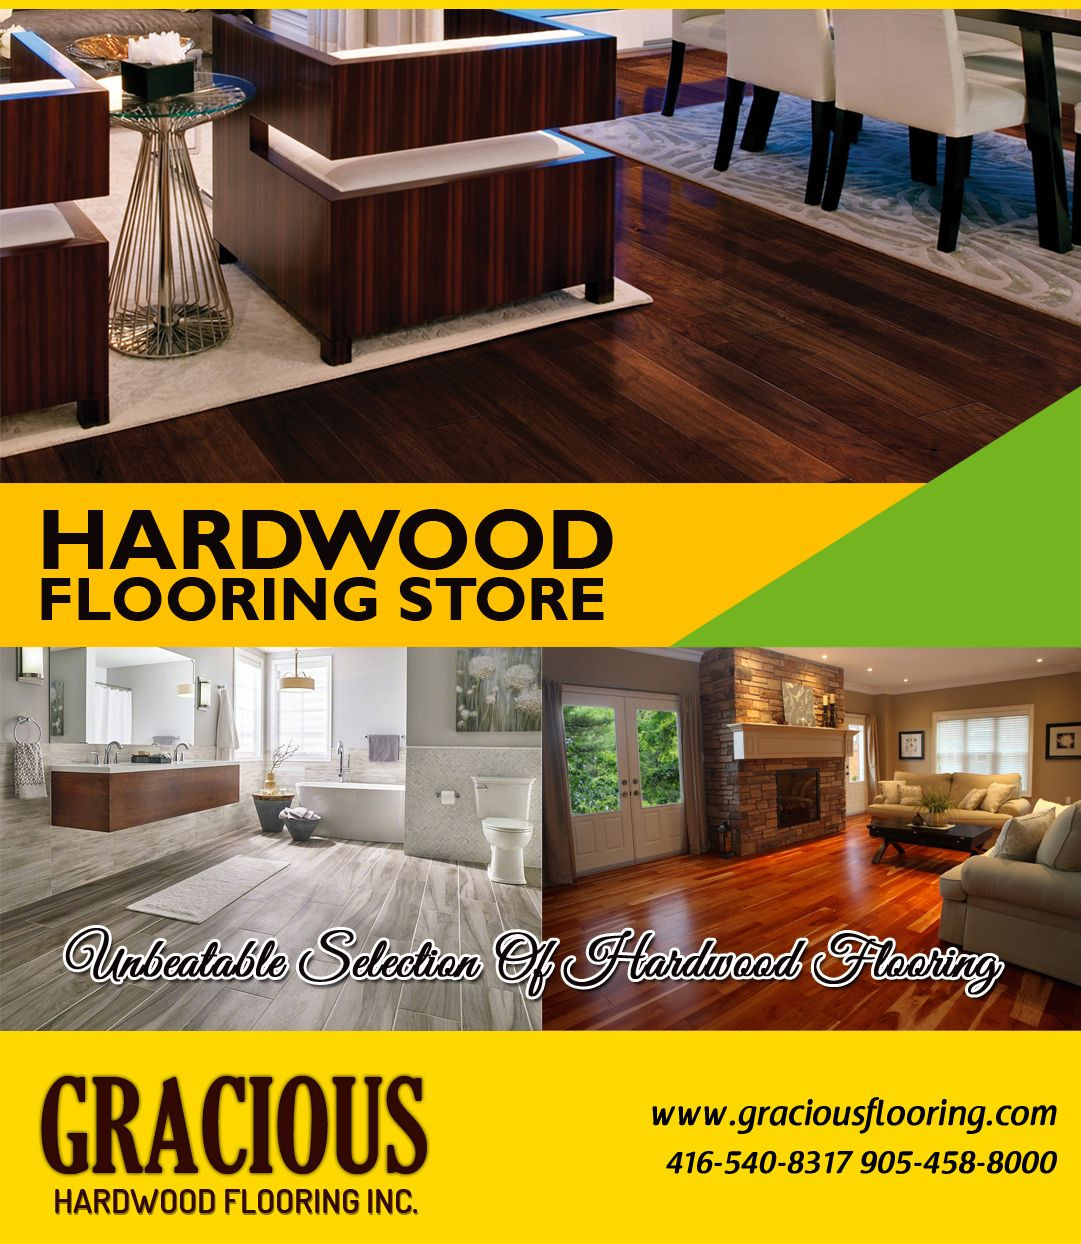 hardwood floor refinishing tools of hello guys if you want to purchase best and and designer hardwood throughout hello guys if you want to purchase best and and designer hardwood flooring in